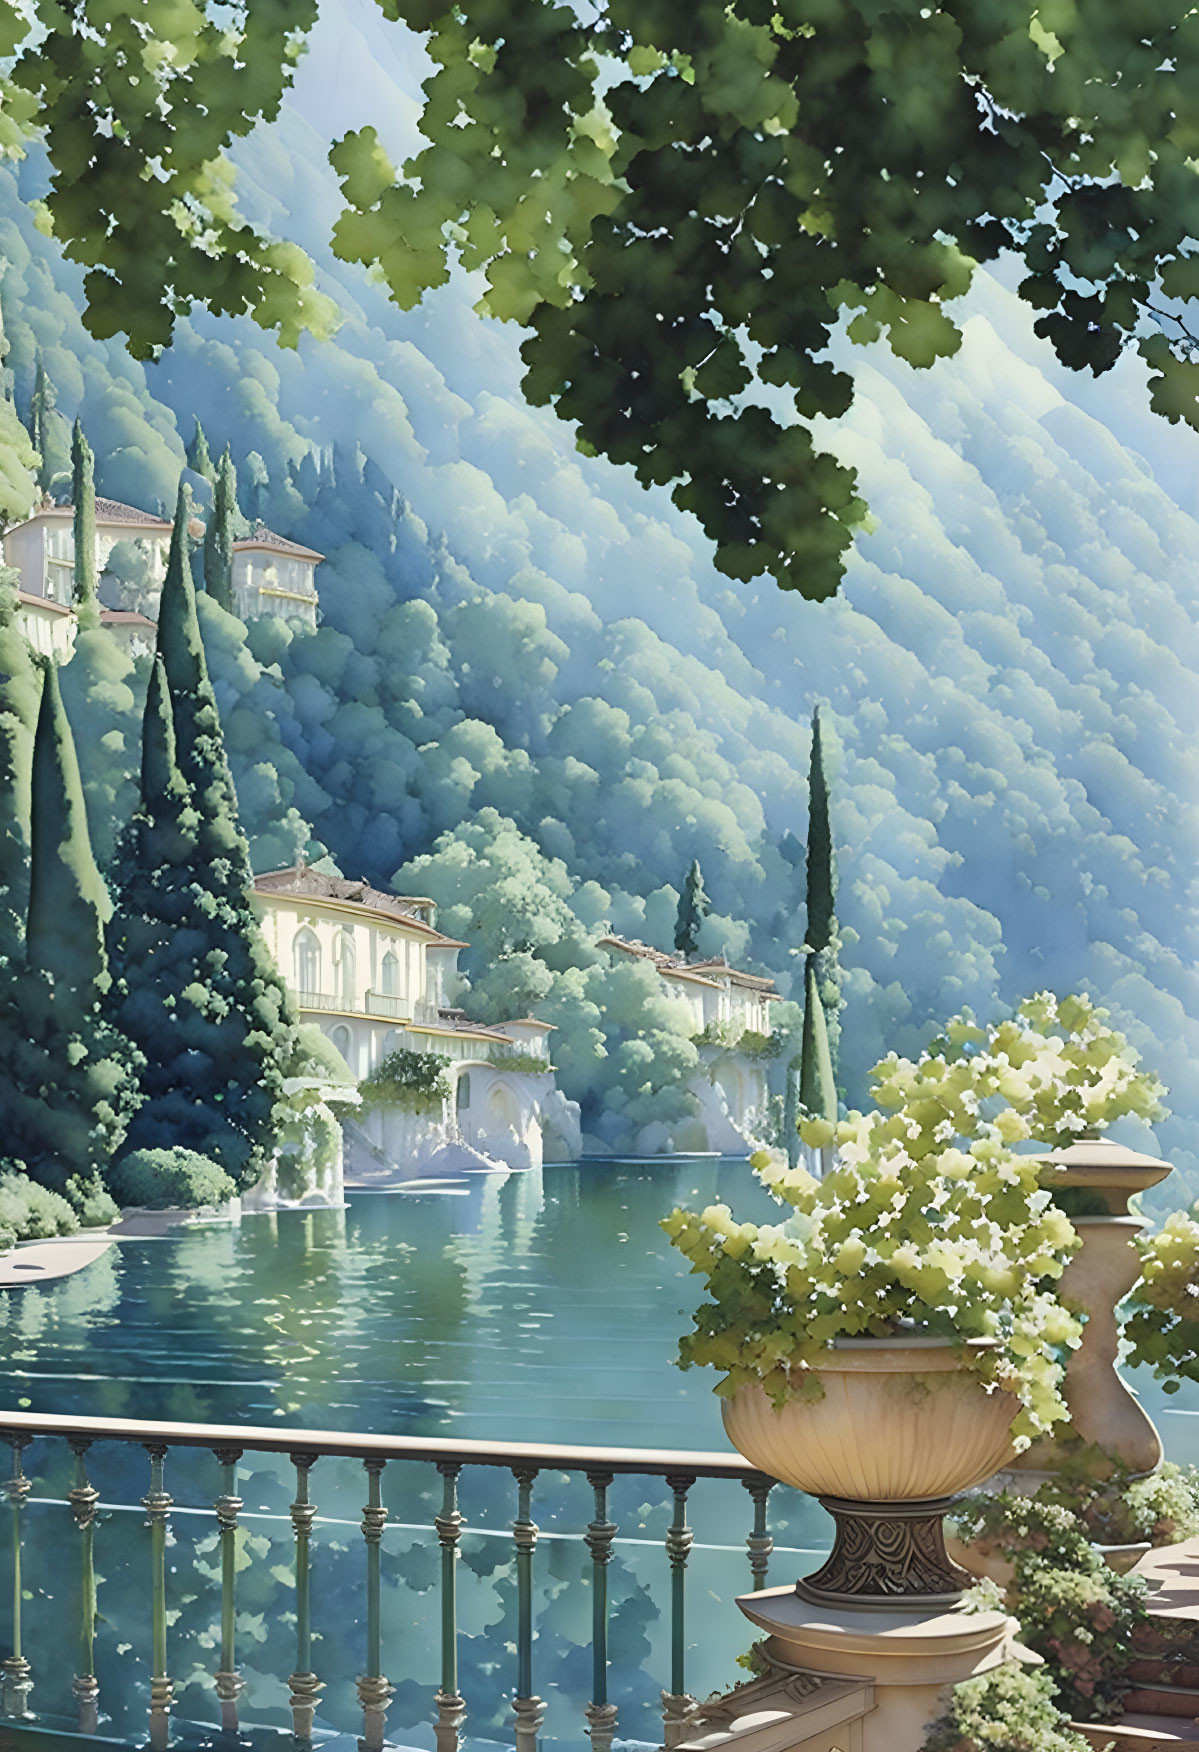 Lake Como was made for Maxfield Parrish 